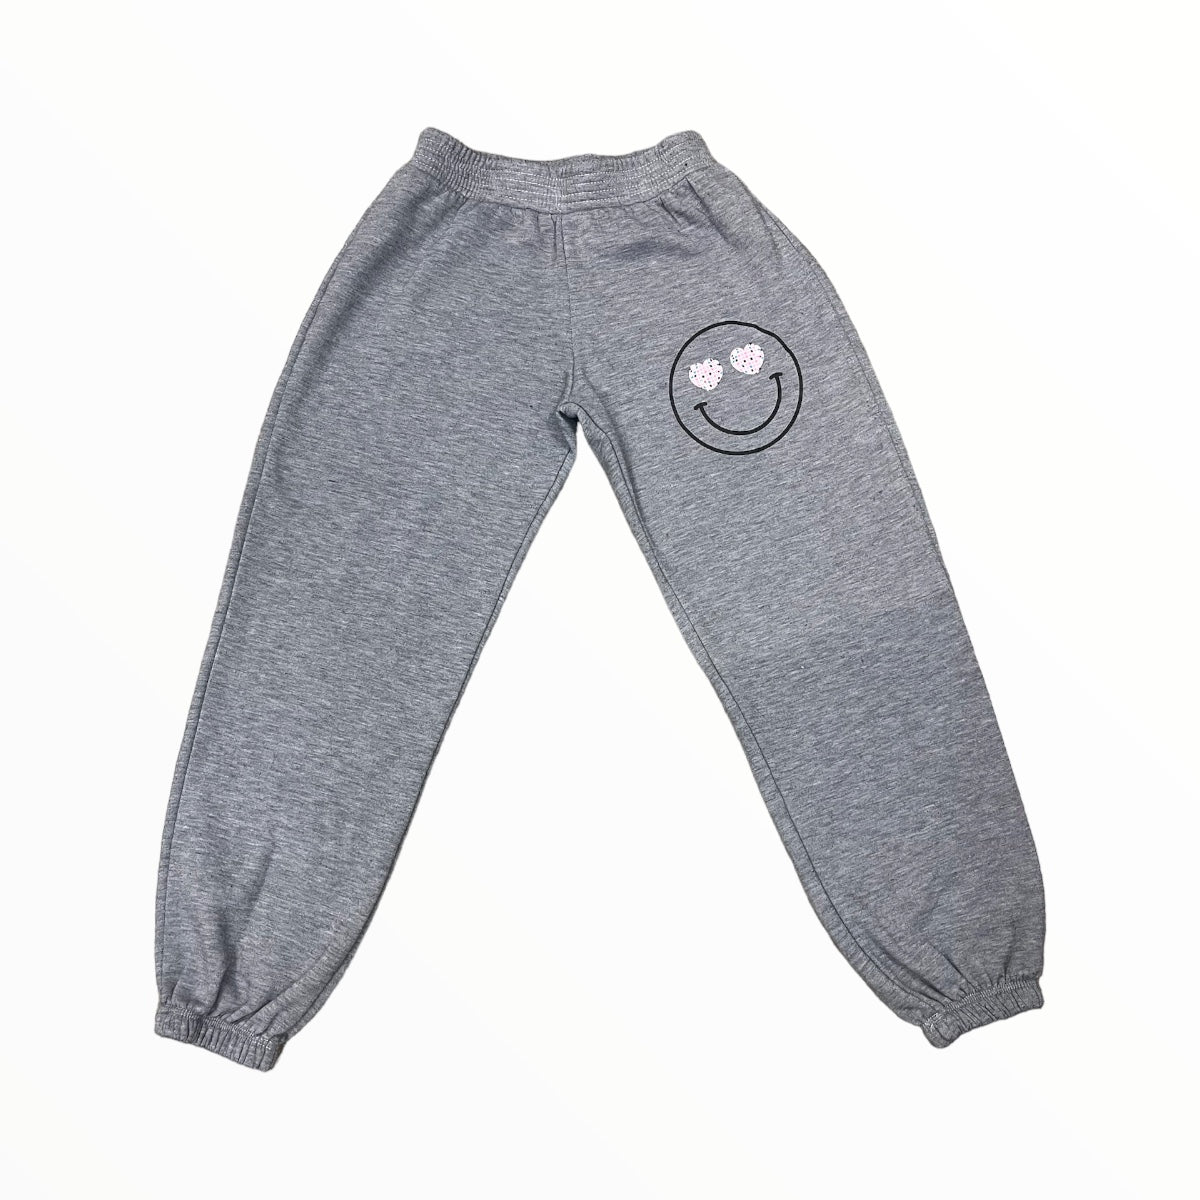 FIREHOUSE SWEATPANT - HEATHER GRAY/DANCING QUEEN